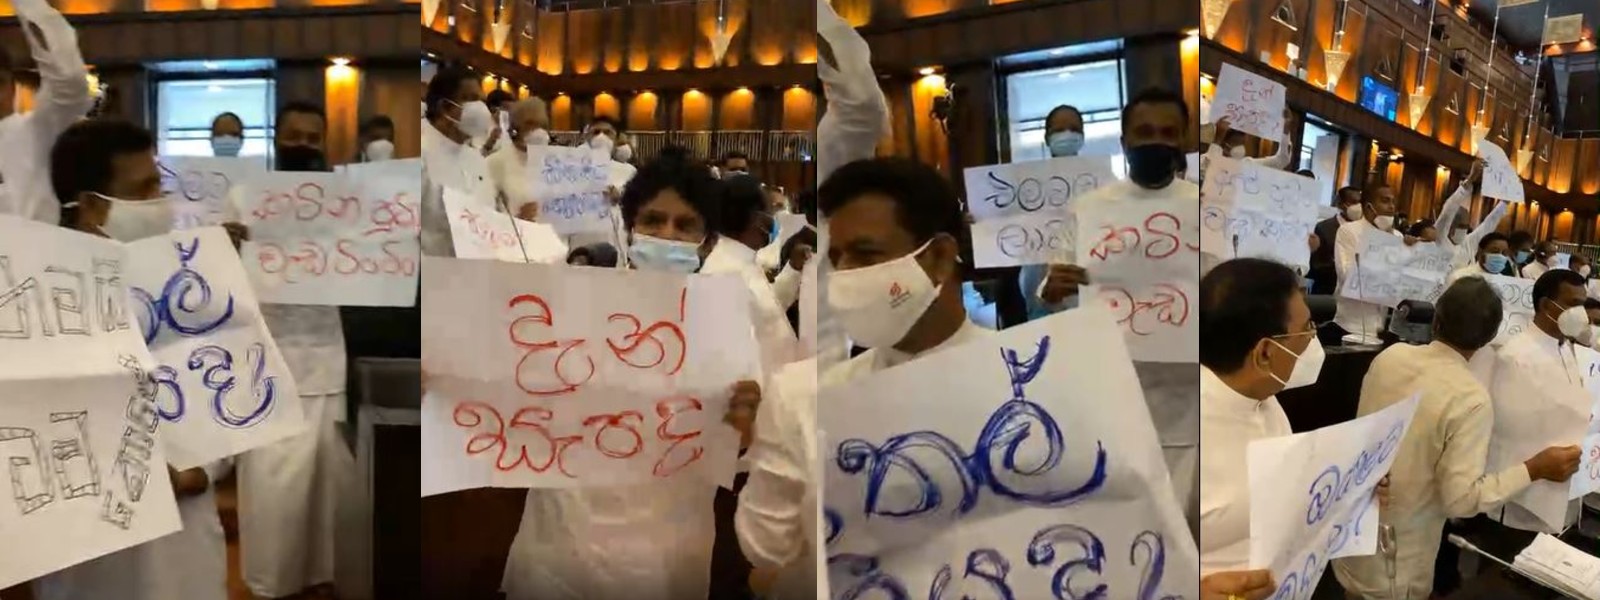 Opposition protests inside parliament against fuel hike